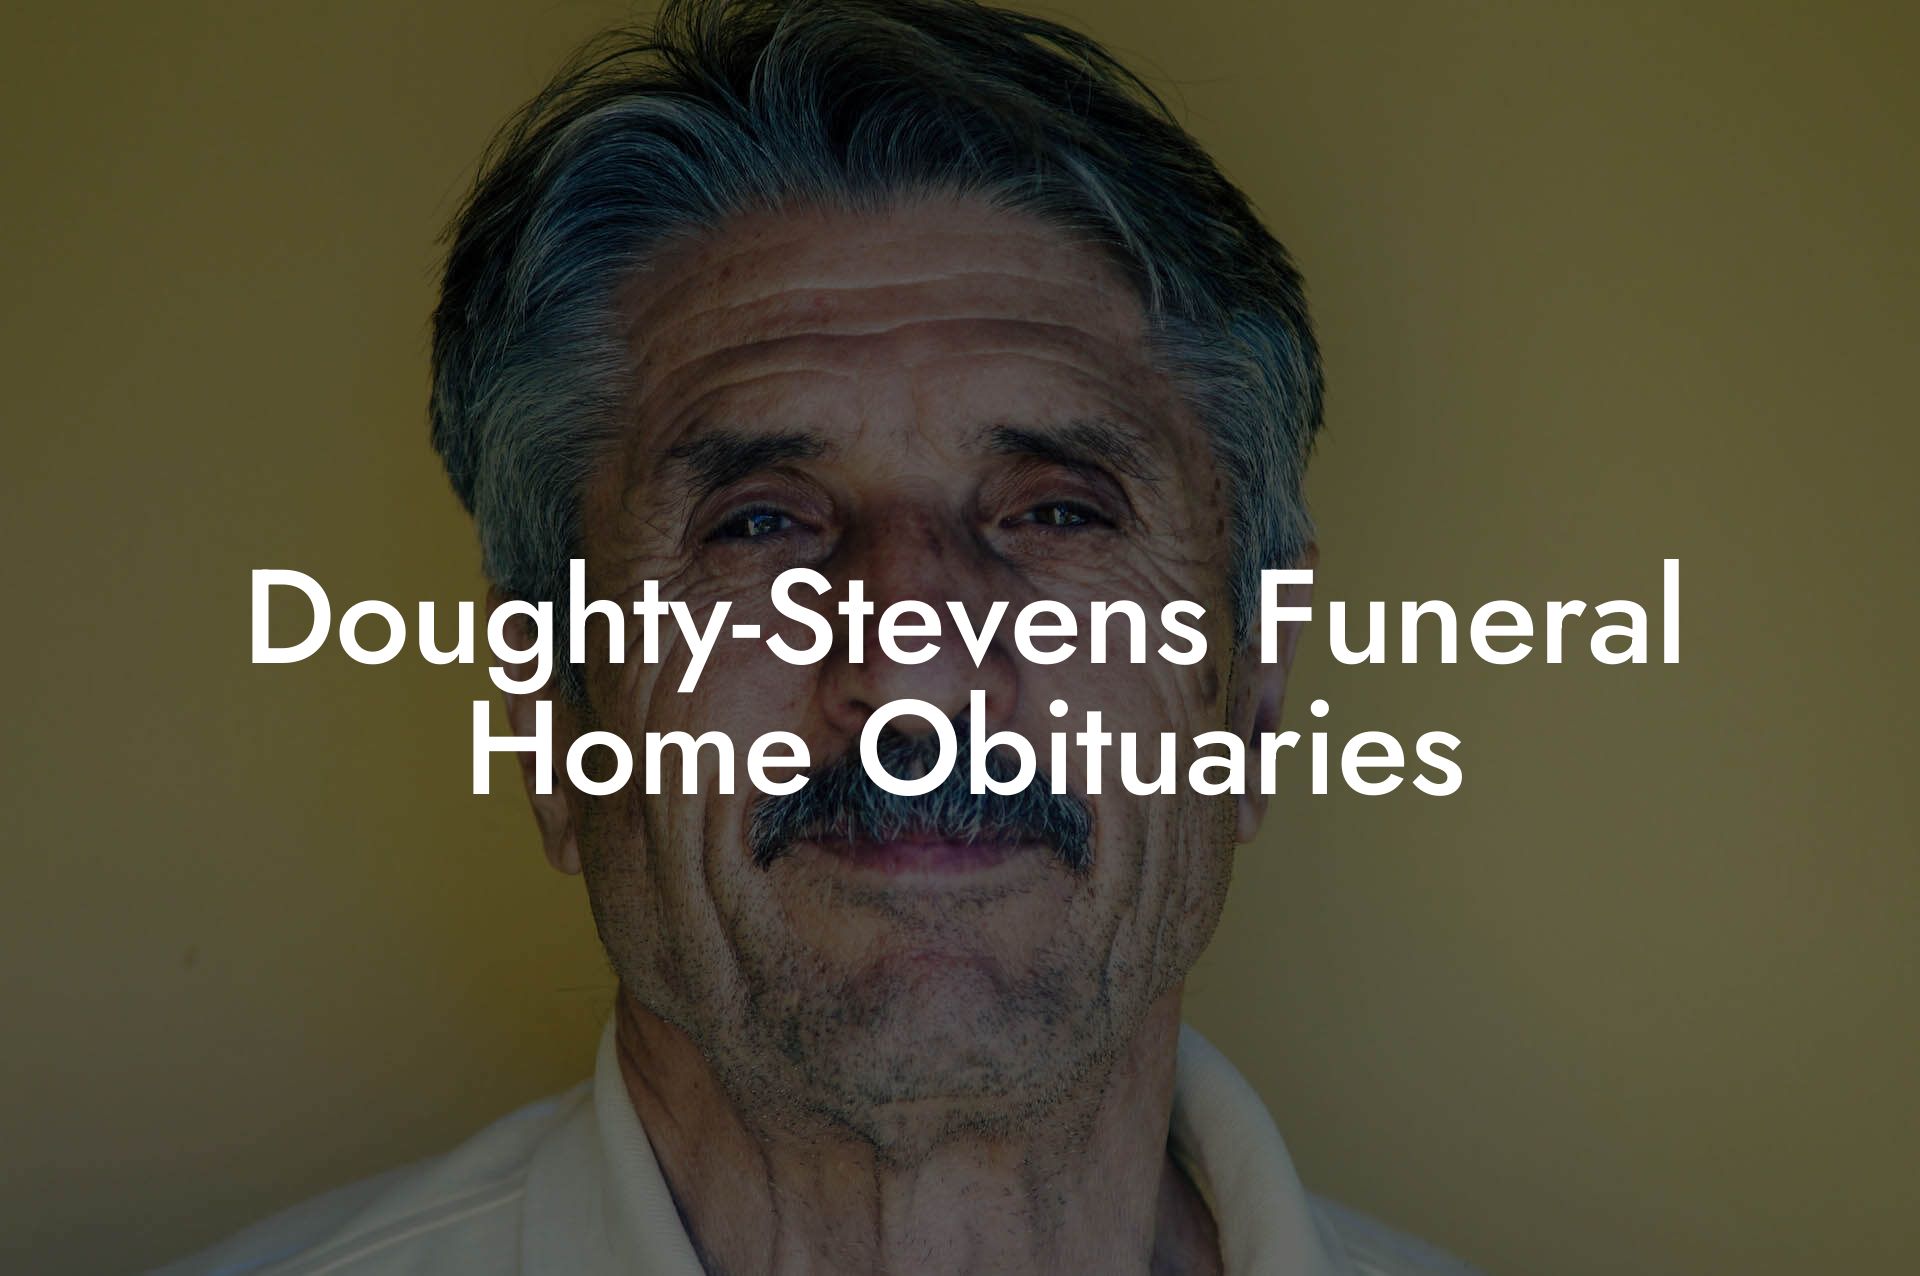 Doughty-Stevens Funeral Home Obituaries